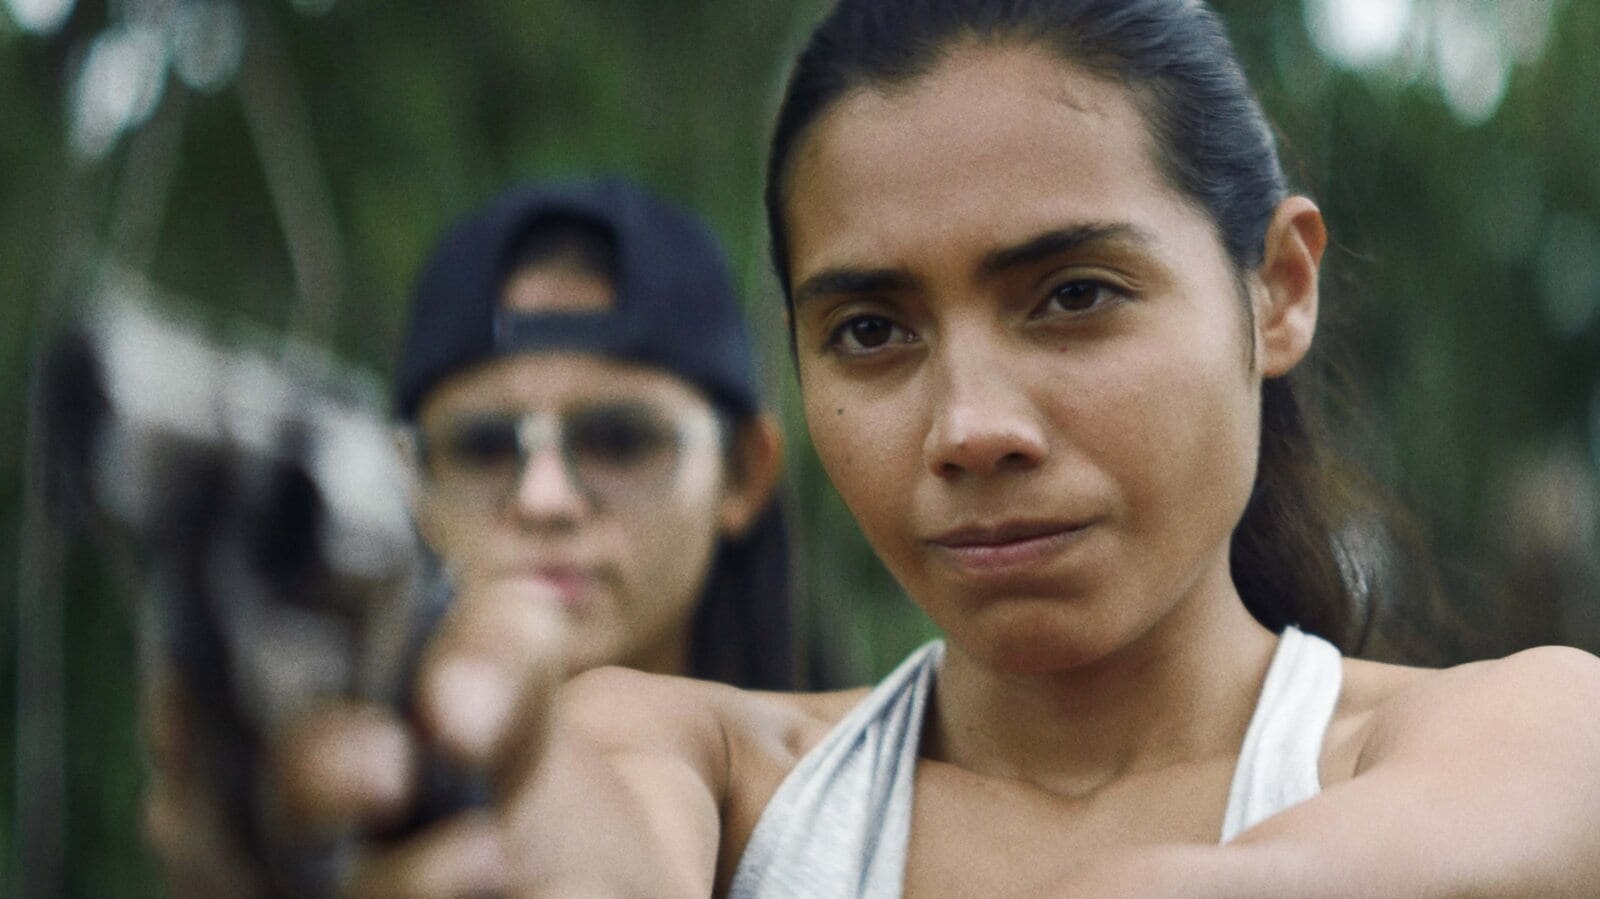 A young woman aims at something with a gun while a man stands behind her